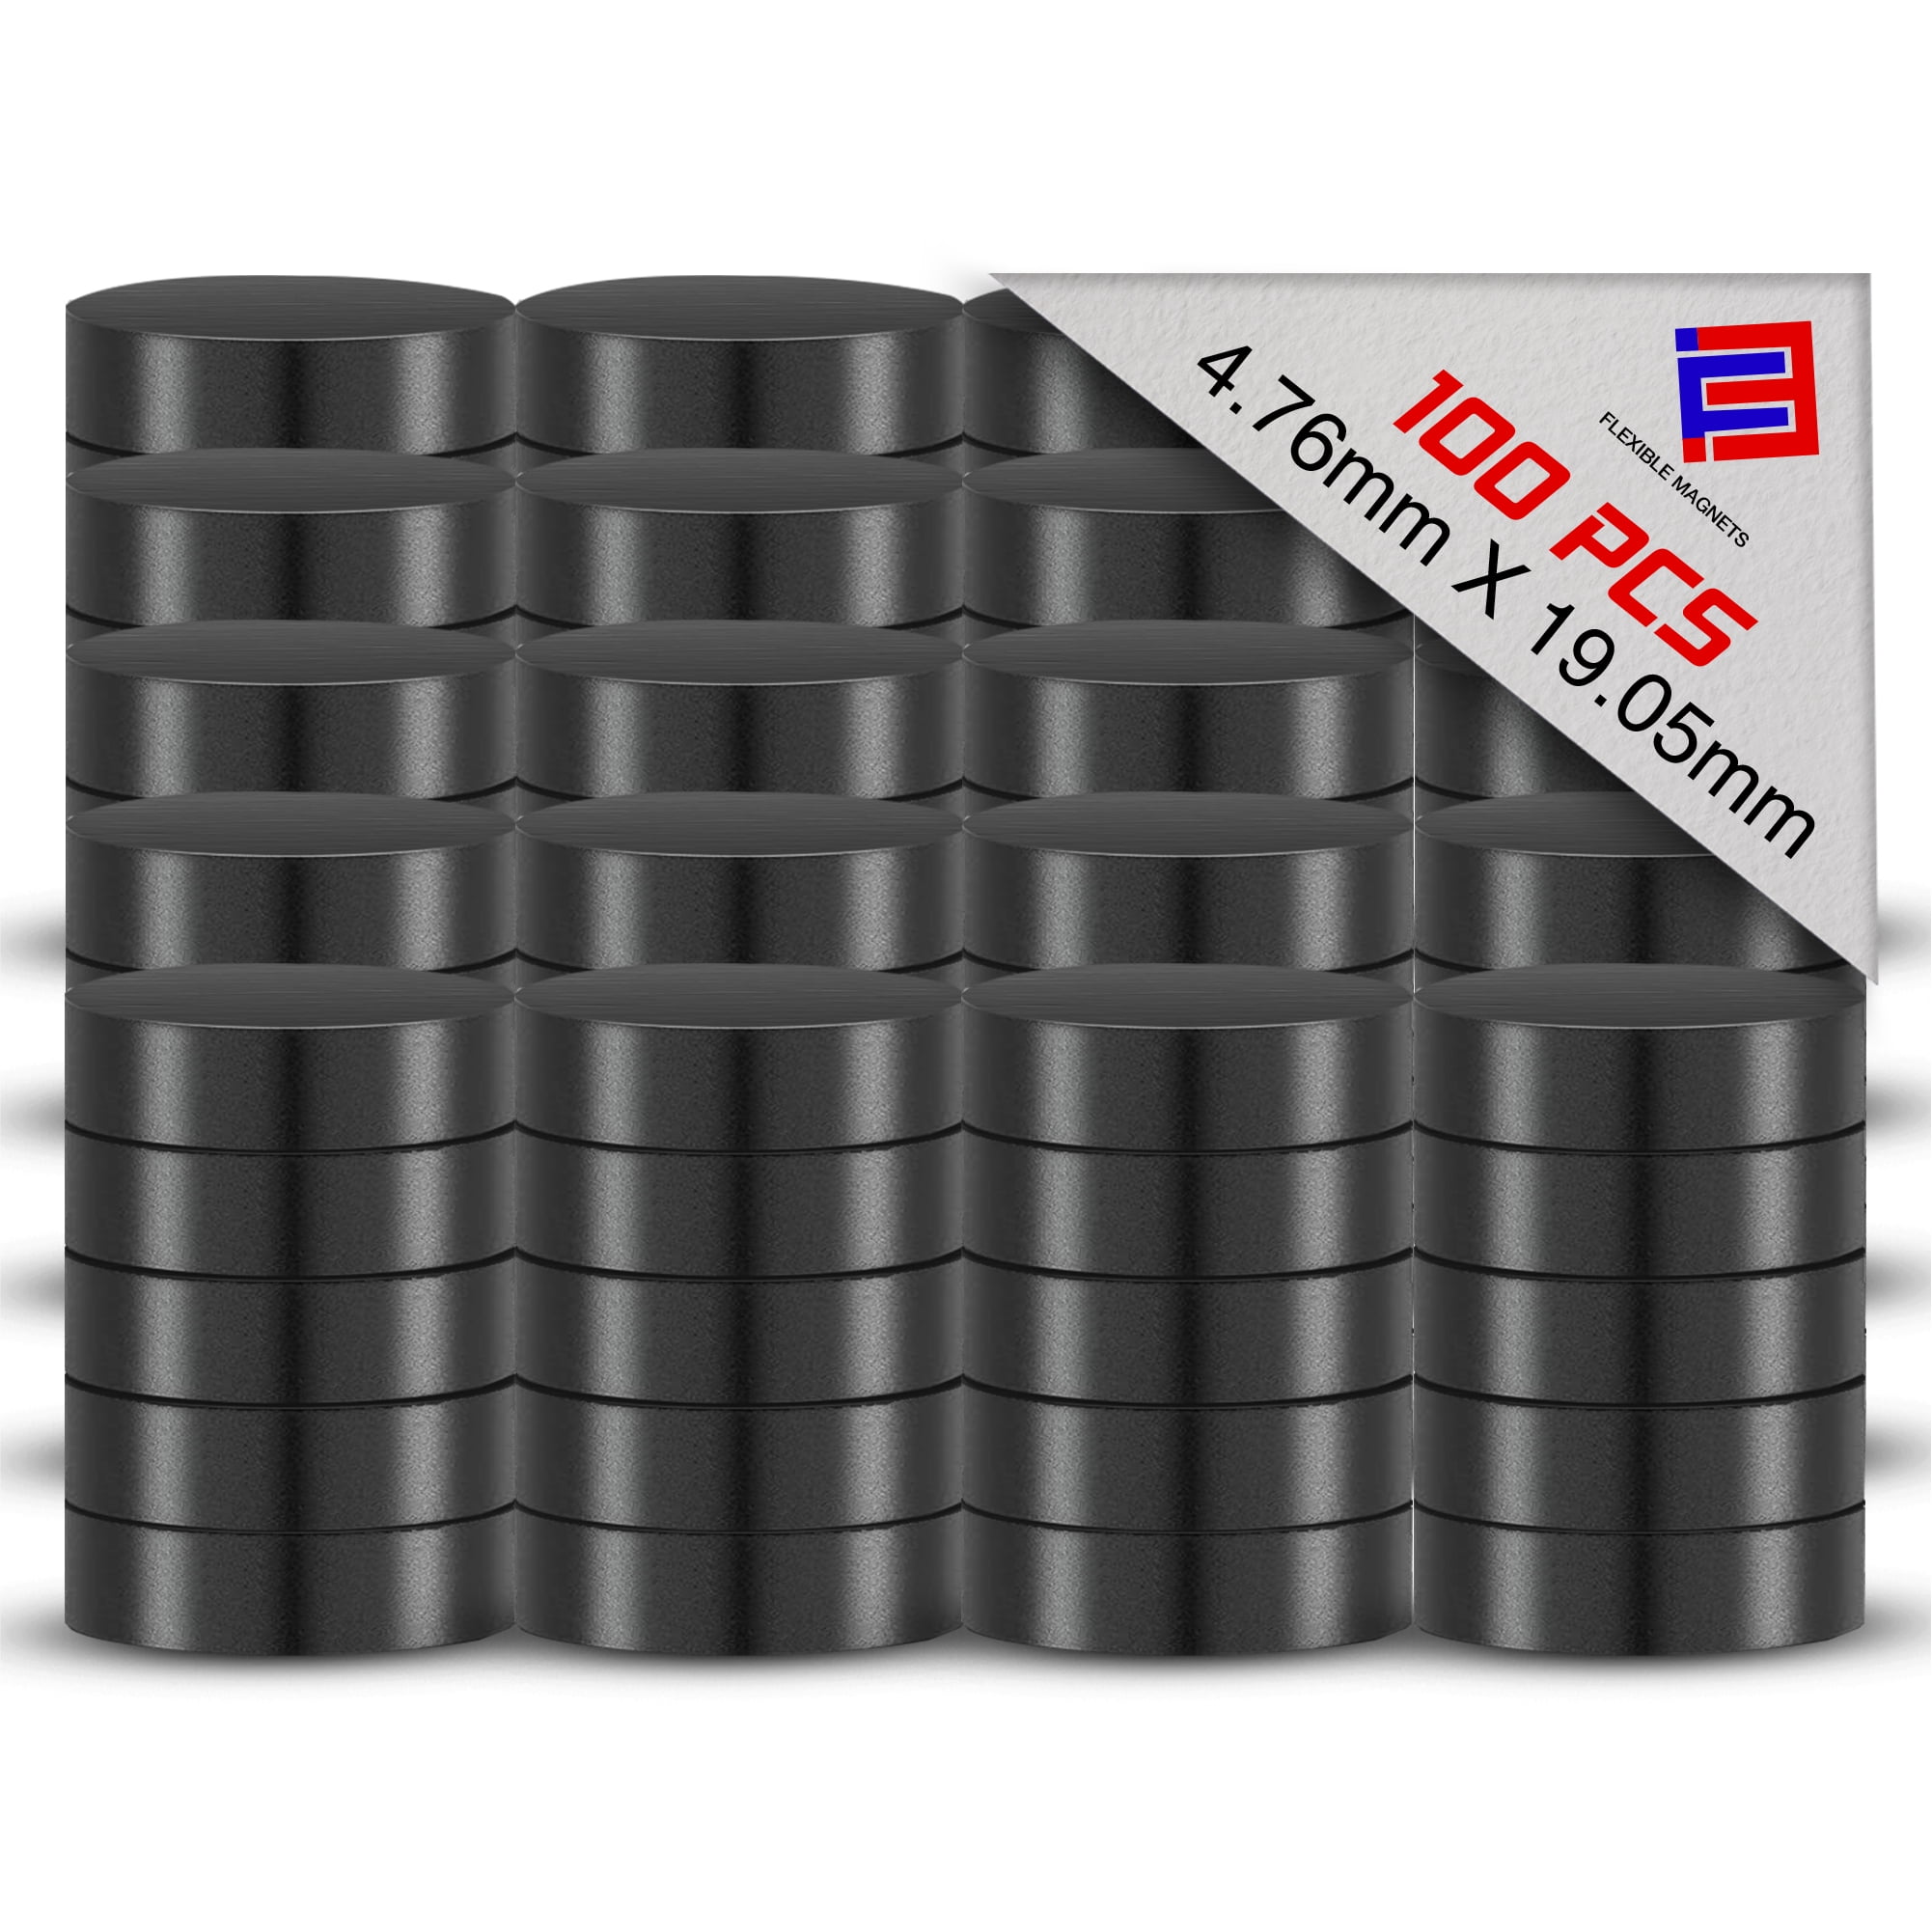 Magnets - Round Disc Ferrite Magnets for Projects, House, Crafts. Round, 50 Pcs - Walmart.com